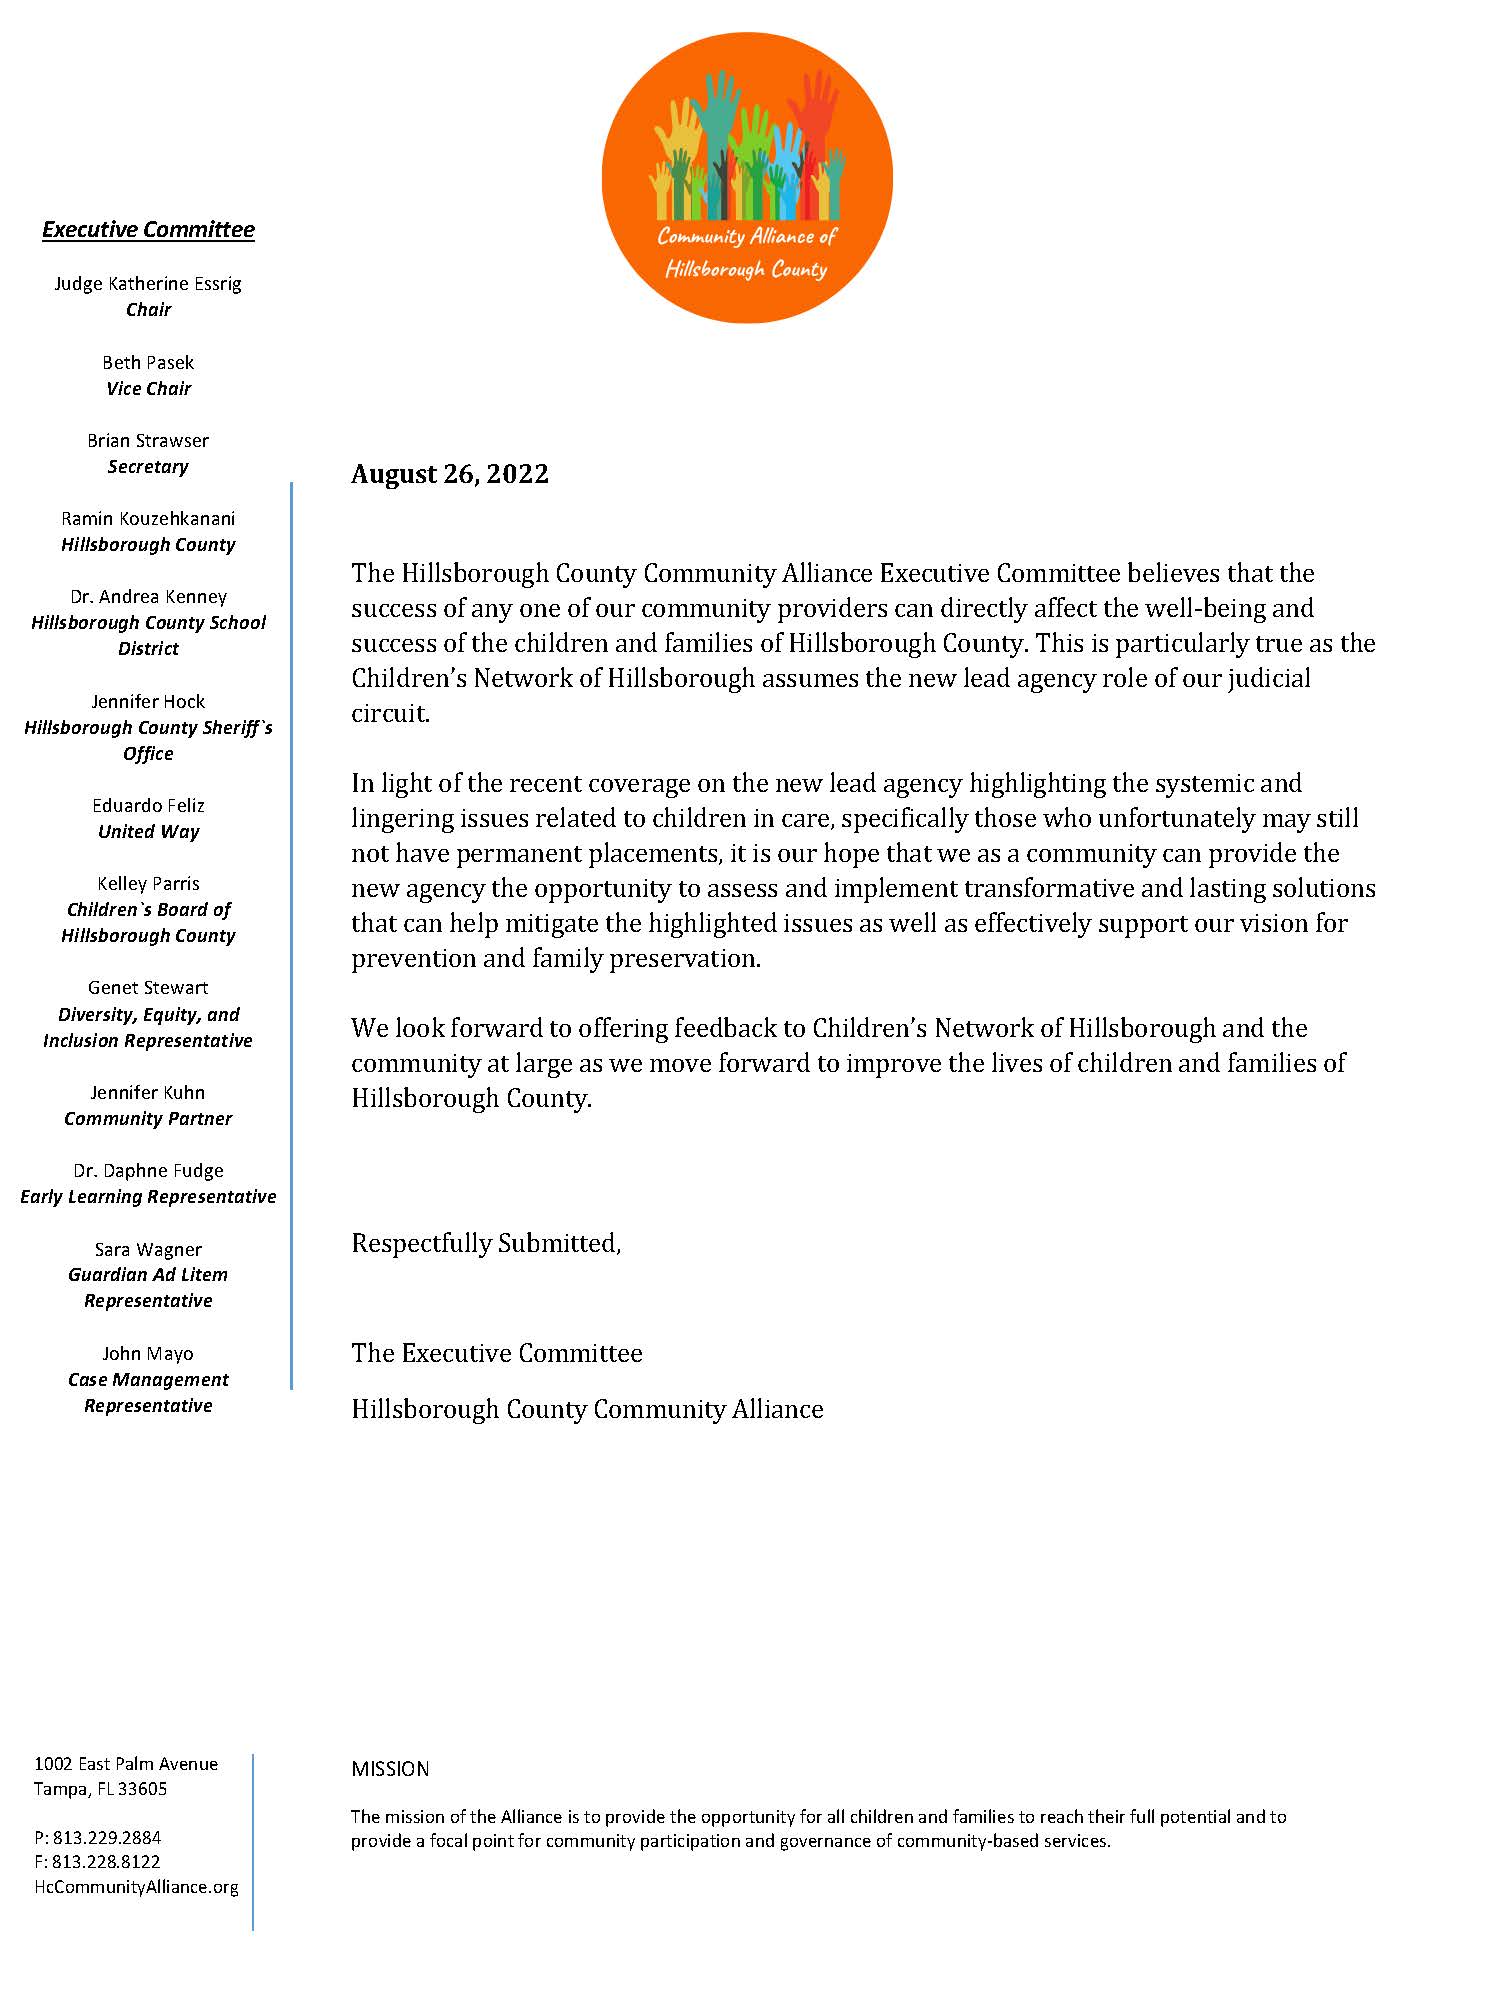 Hillsborough County Community Alliance Executive Committee Support Statement